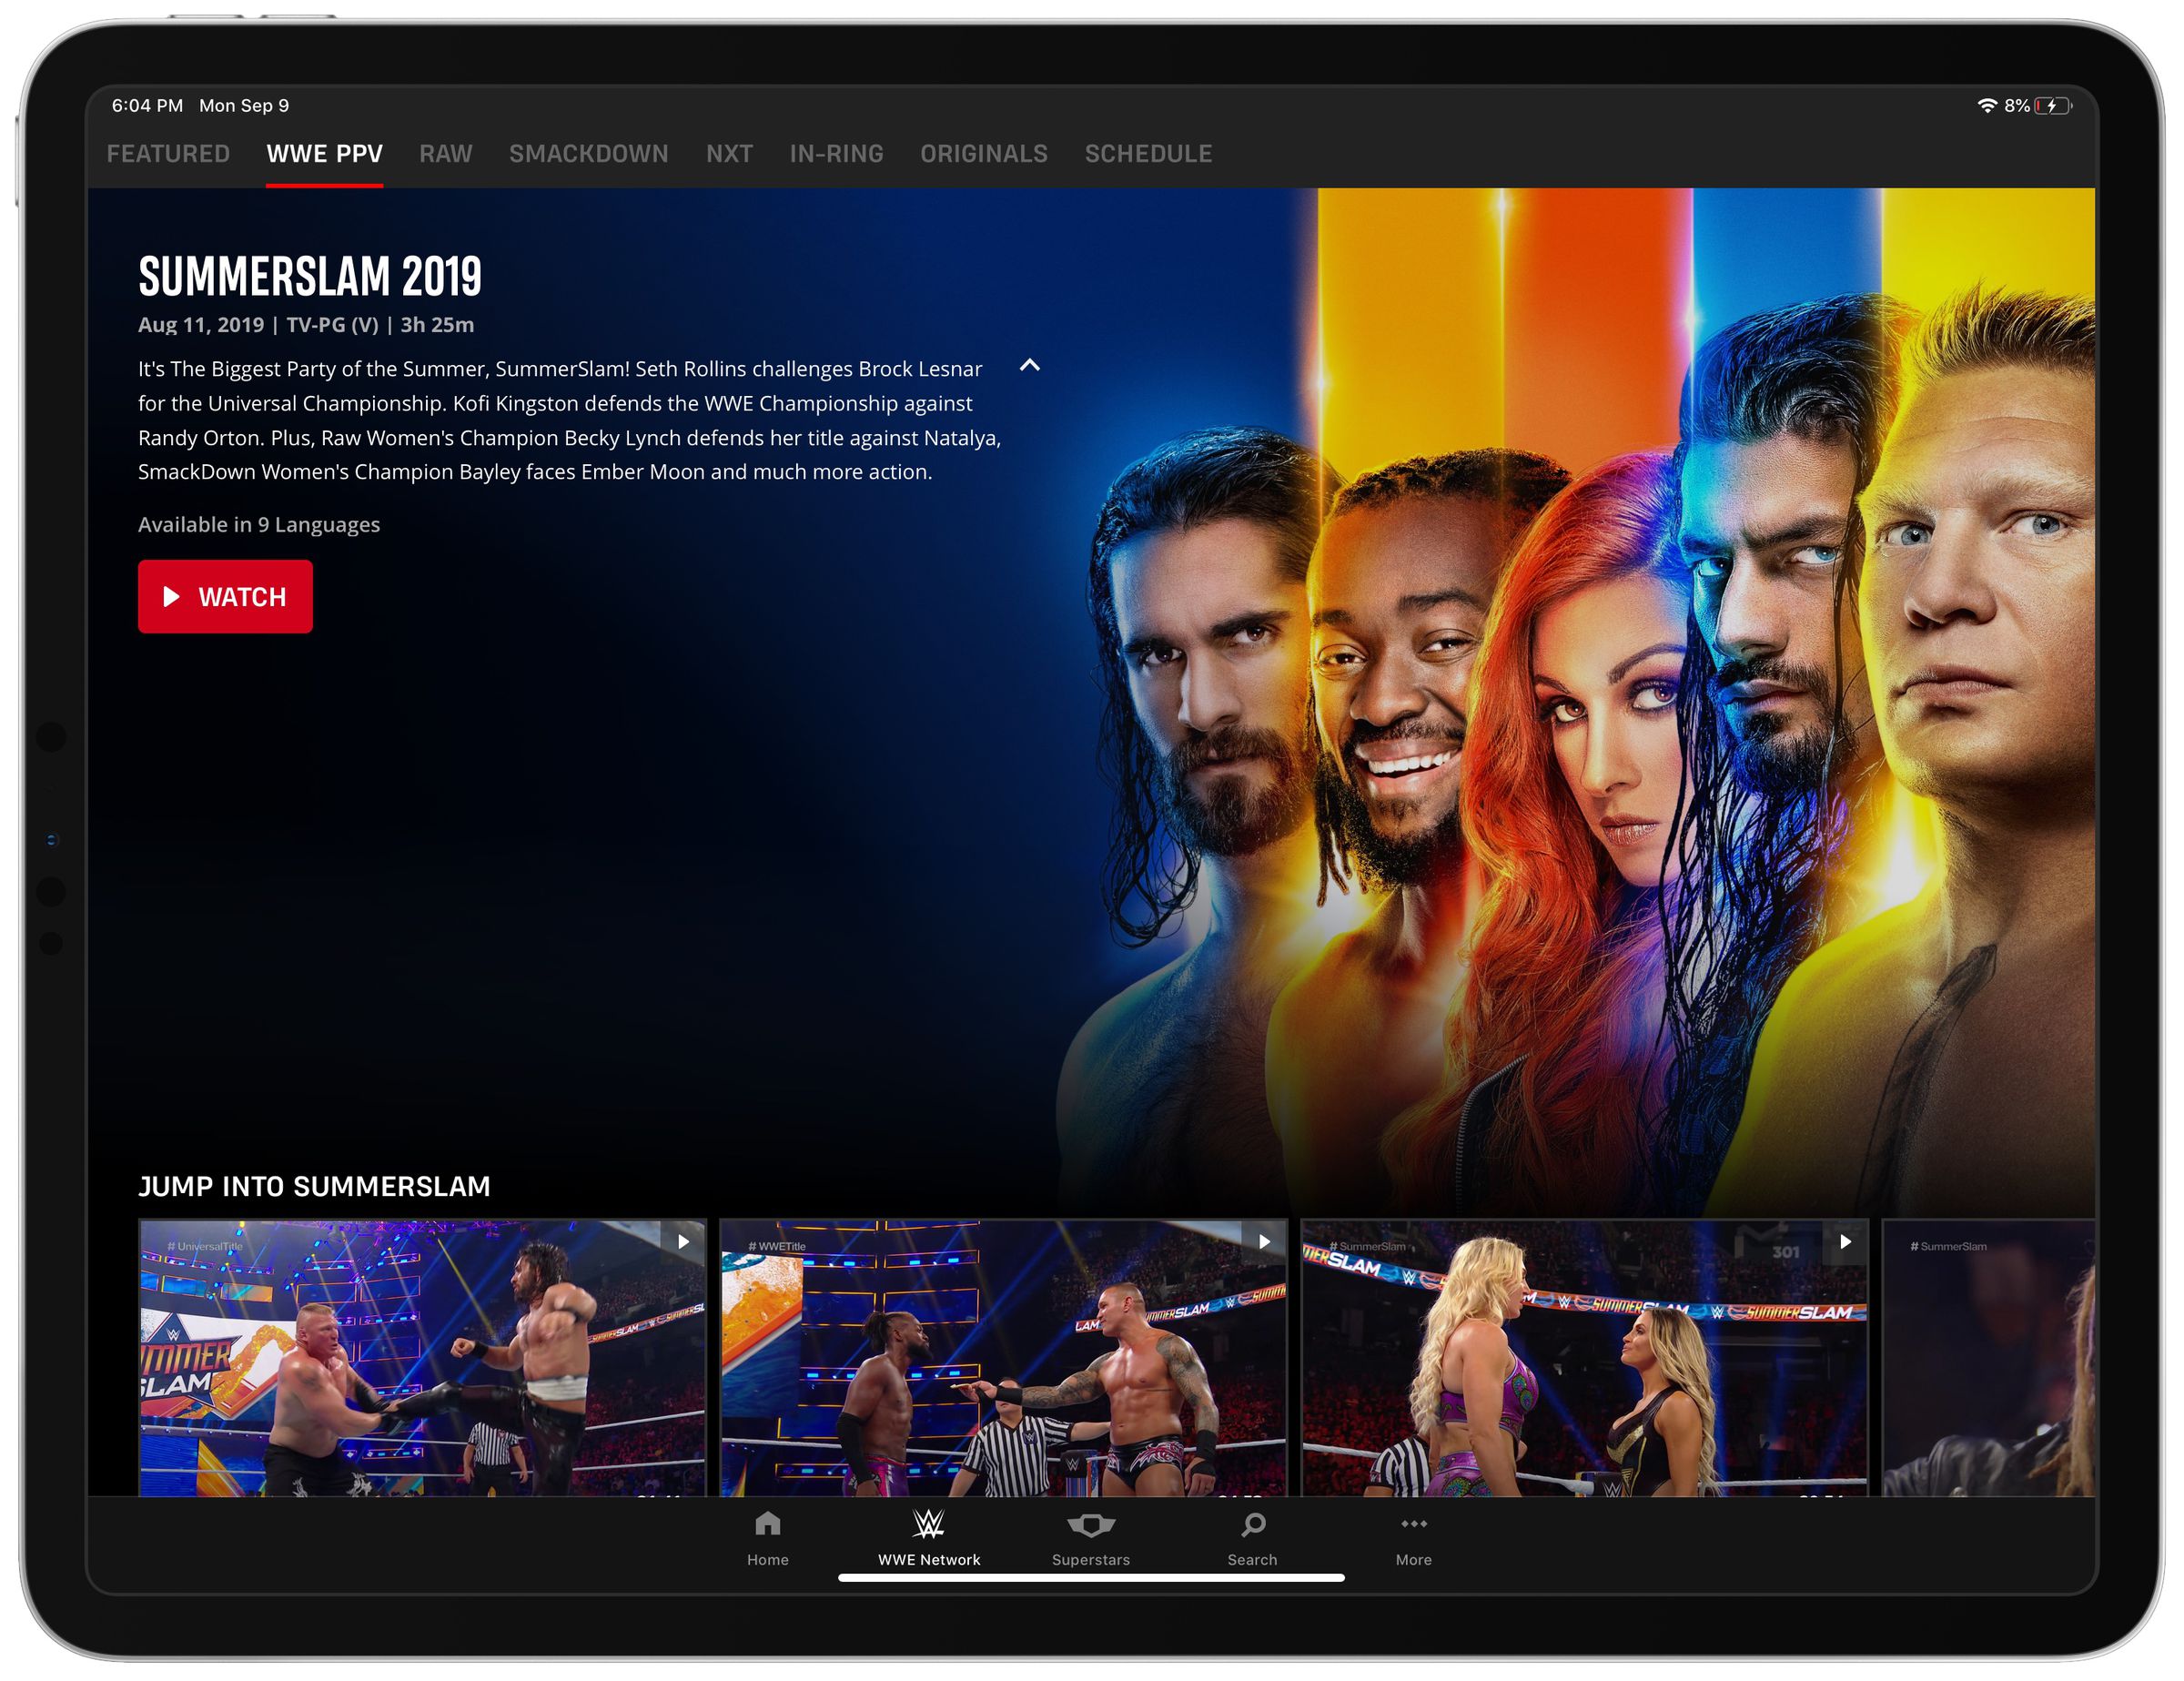 WWE Network is now easier to navigate and has been spruced up with nicer graphics and chapters for each event.